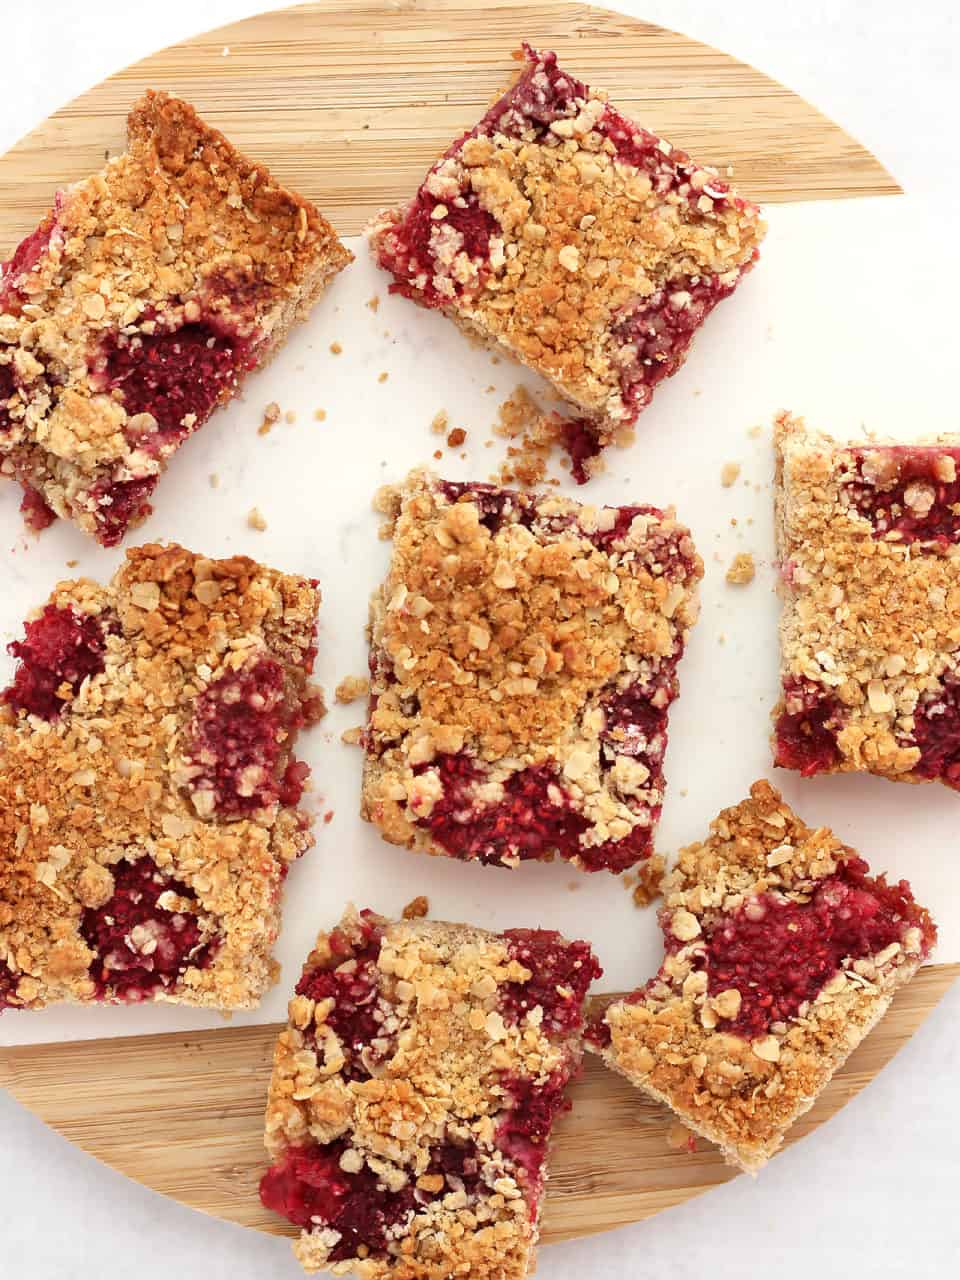 Seven oatmeal bars with raspberries on a wood and marble cutting board.